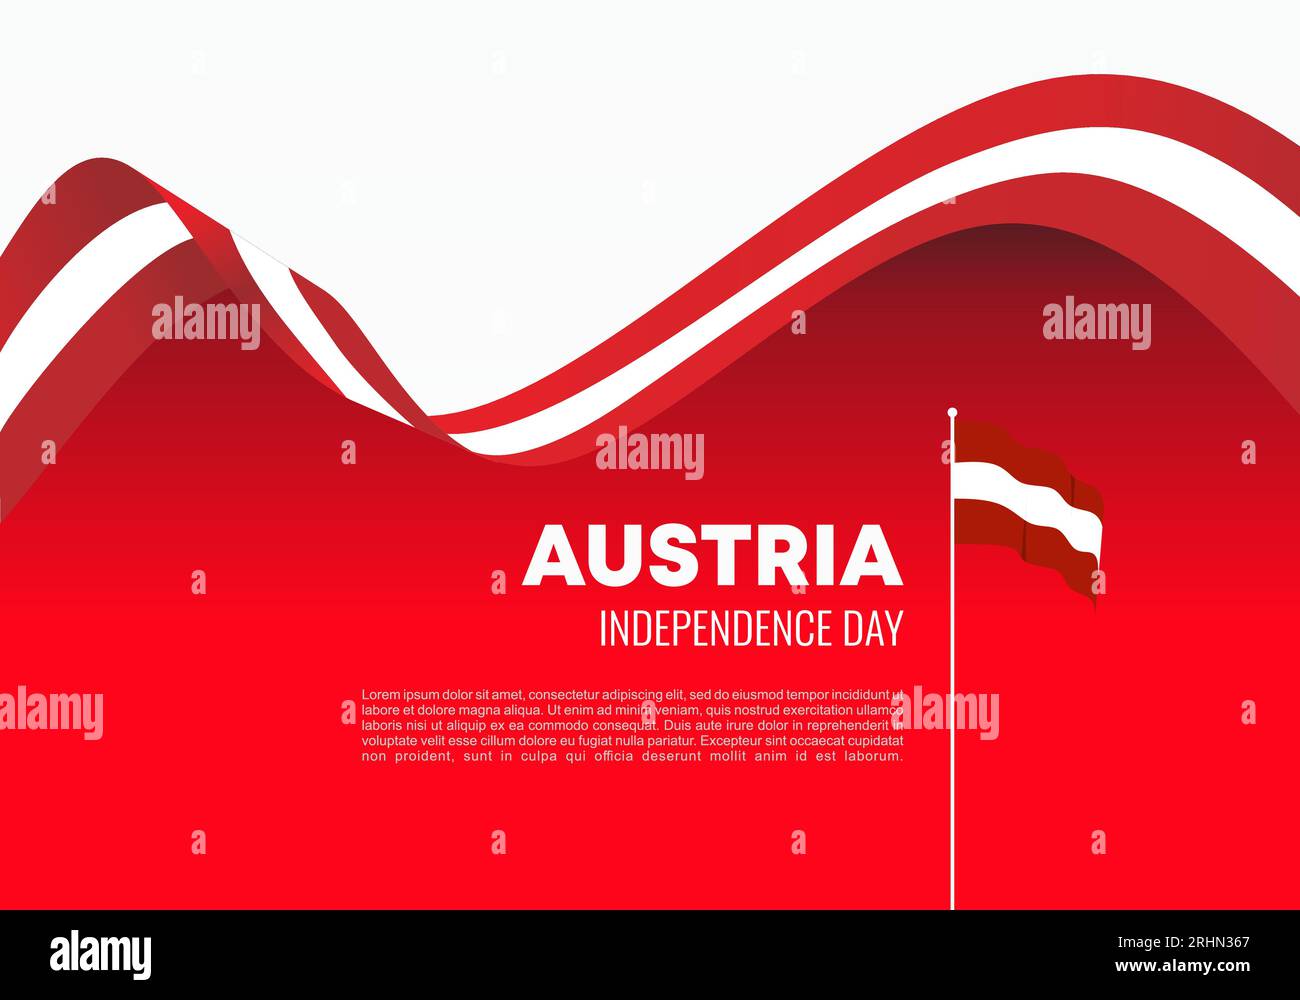 Austria independence day background for national celebration on October 26. Stock Vector